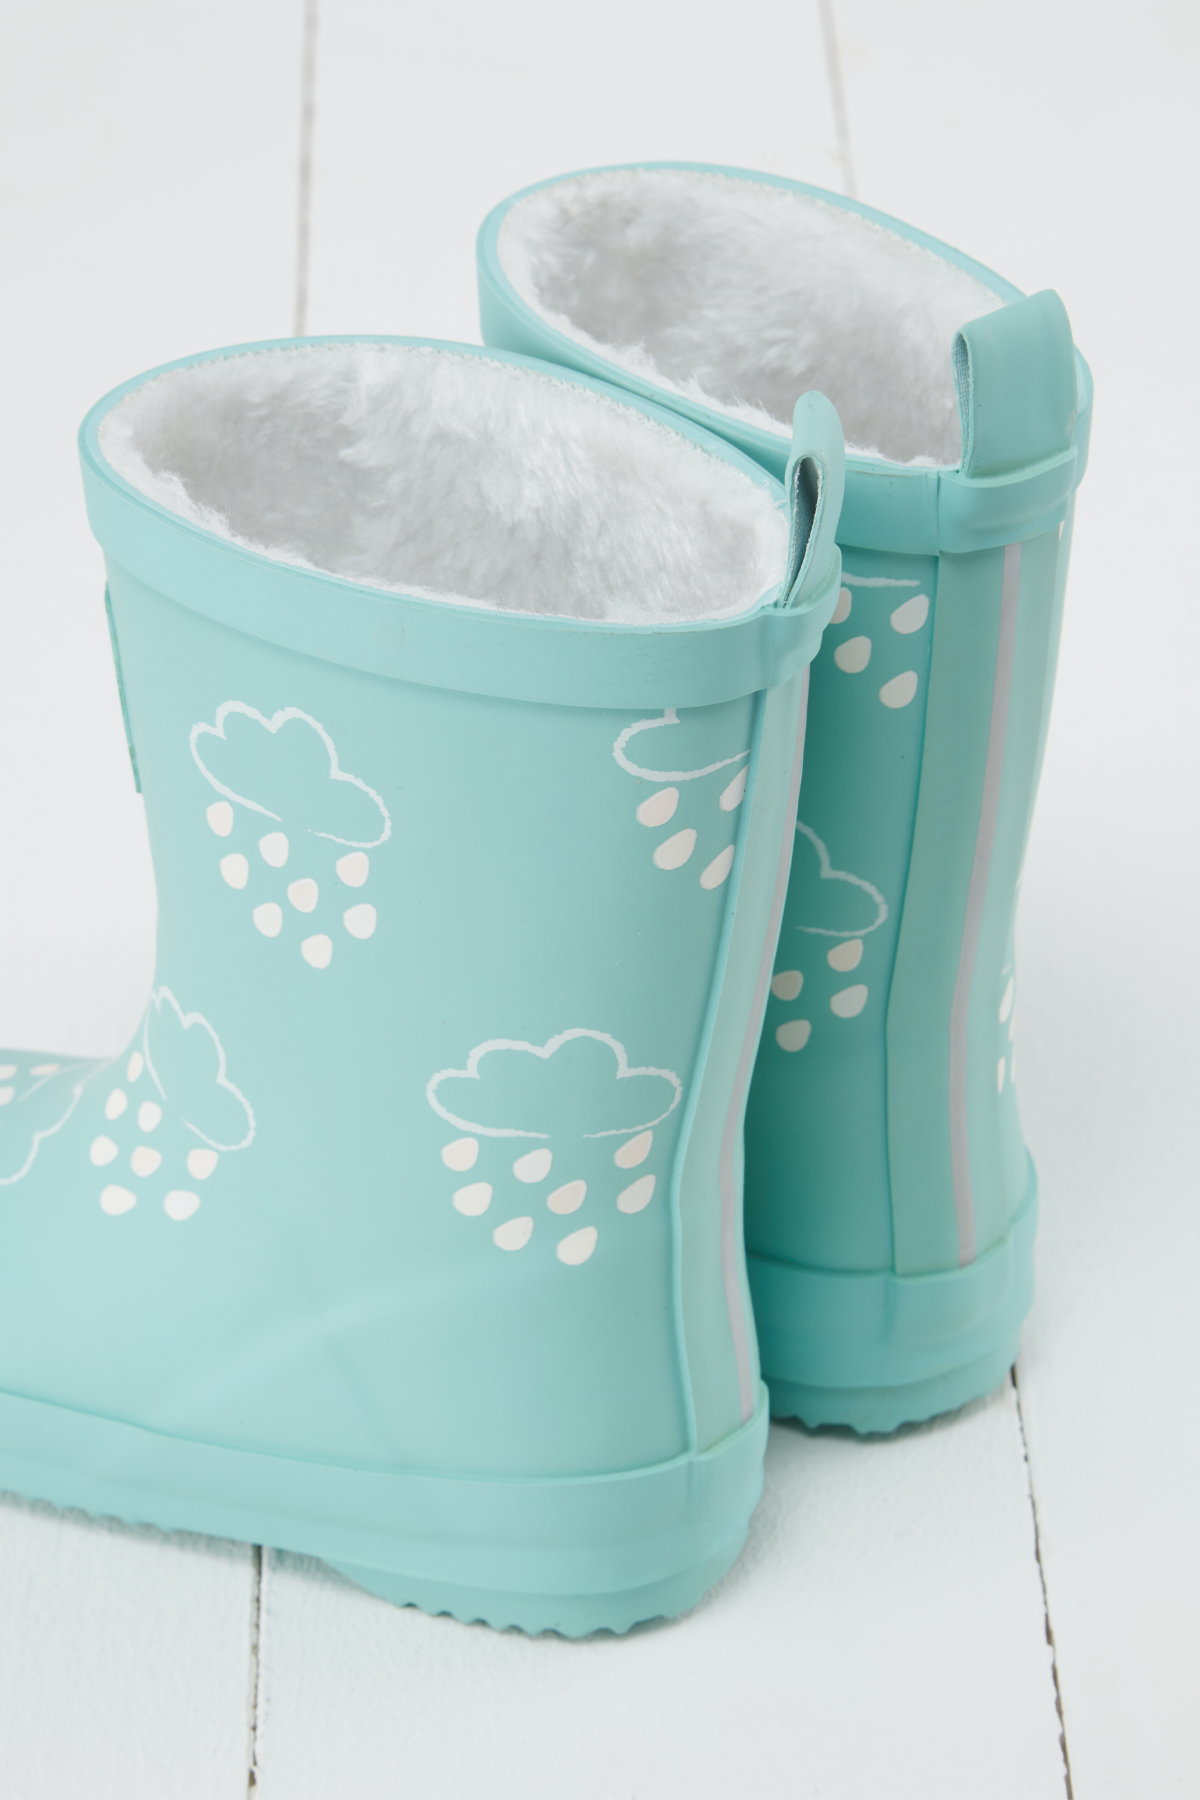 Pistachio Colour-Changing Kids Wellies with Teddy Fleece Lining